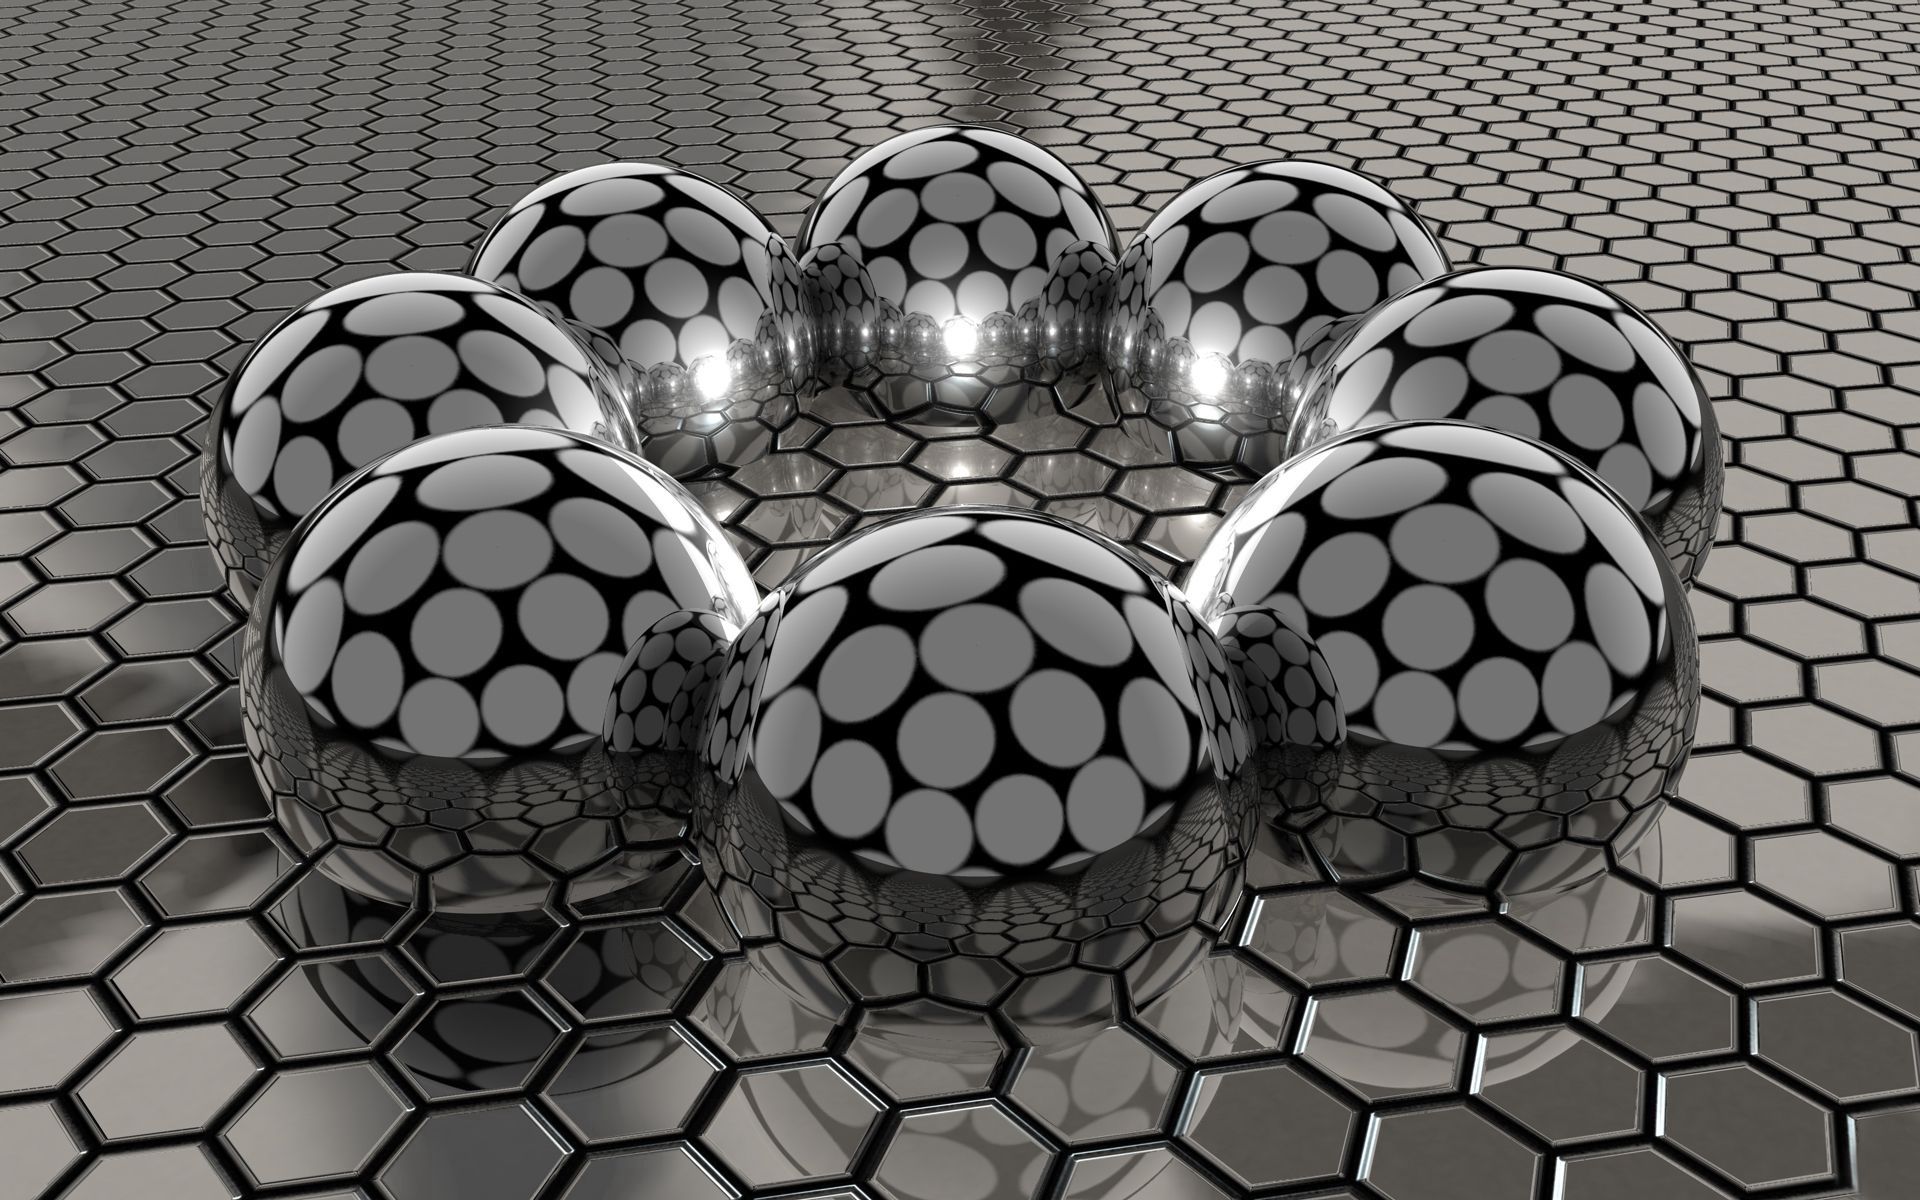 127500 free wallpaper 2160x3840 for phone, download images honeycomb, 3d, steel, balls 2160x3840 for mobile